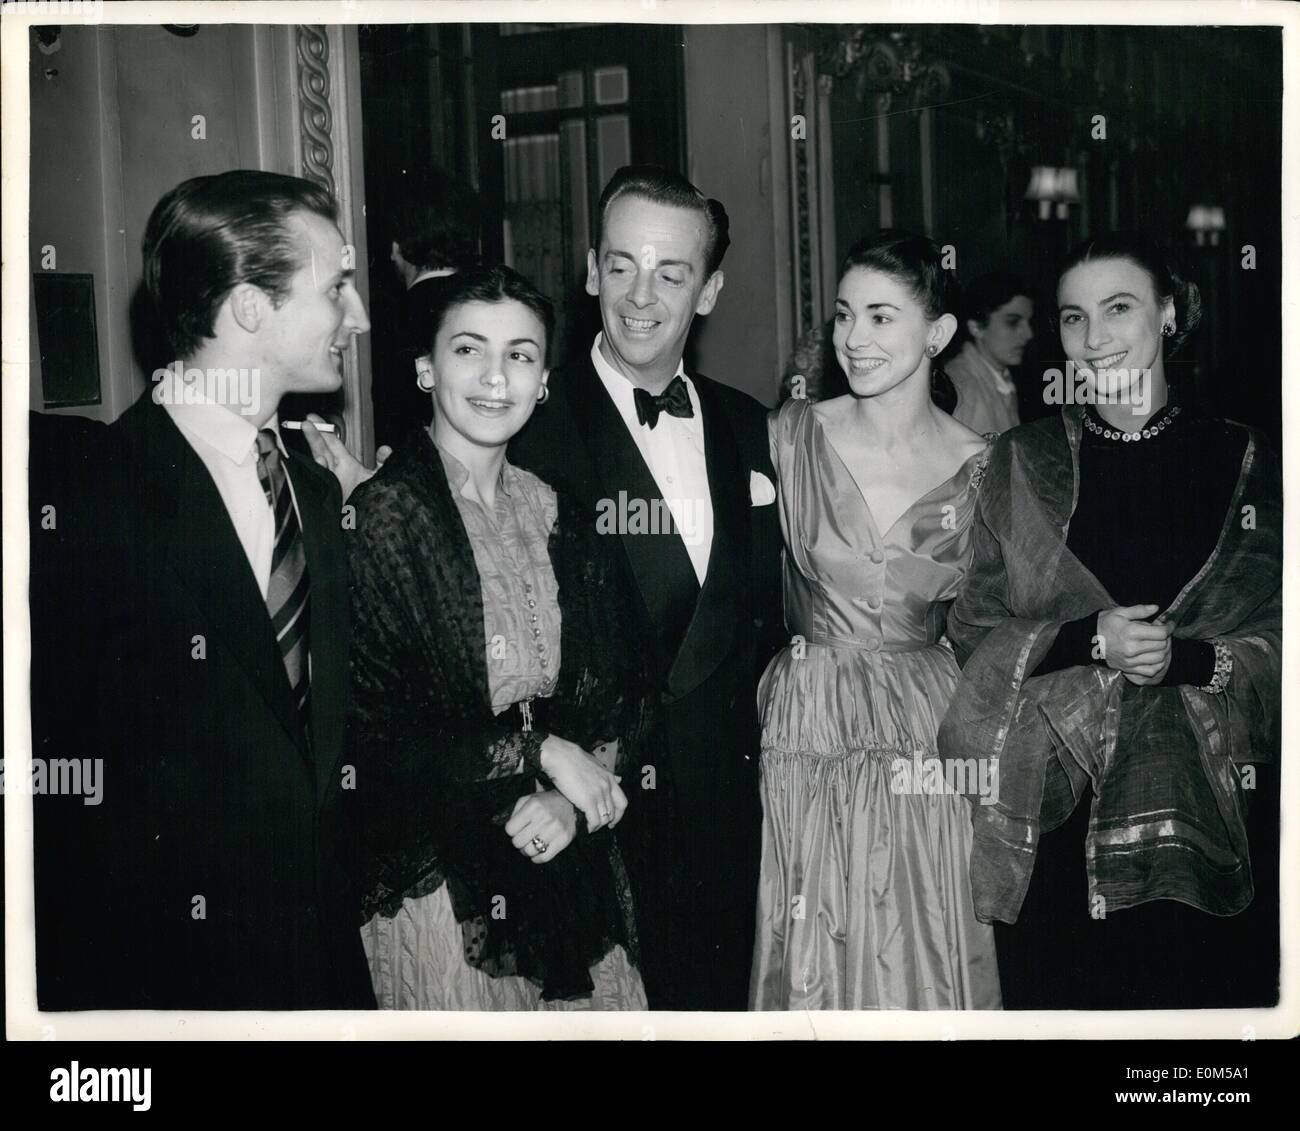 Aug. 08, 1953 - Stars attend first night of ''Cine-Bijou'' by the Ballets De Paris Roland Petit at the Stoll Theatre : Photo shows (L. to R.) Stephan Kaboysky, Nora Kovach, Robert Helpman, Margot Fonteyn and Natalie Leslie arriving at the Stoll Theatre for the Ballet last night. Stock Photo